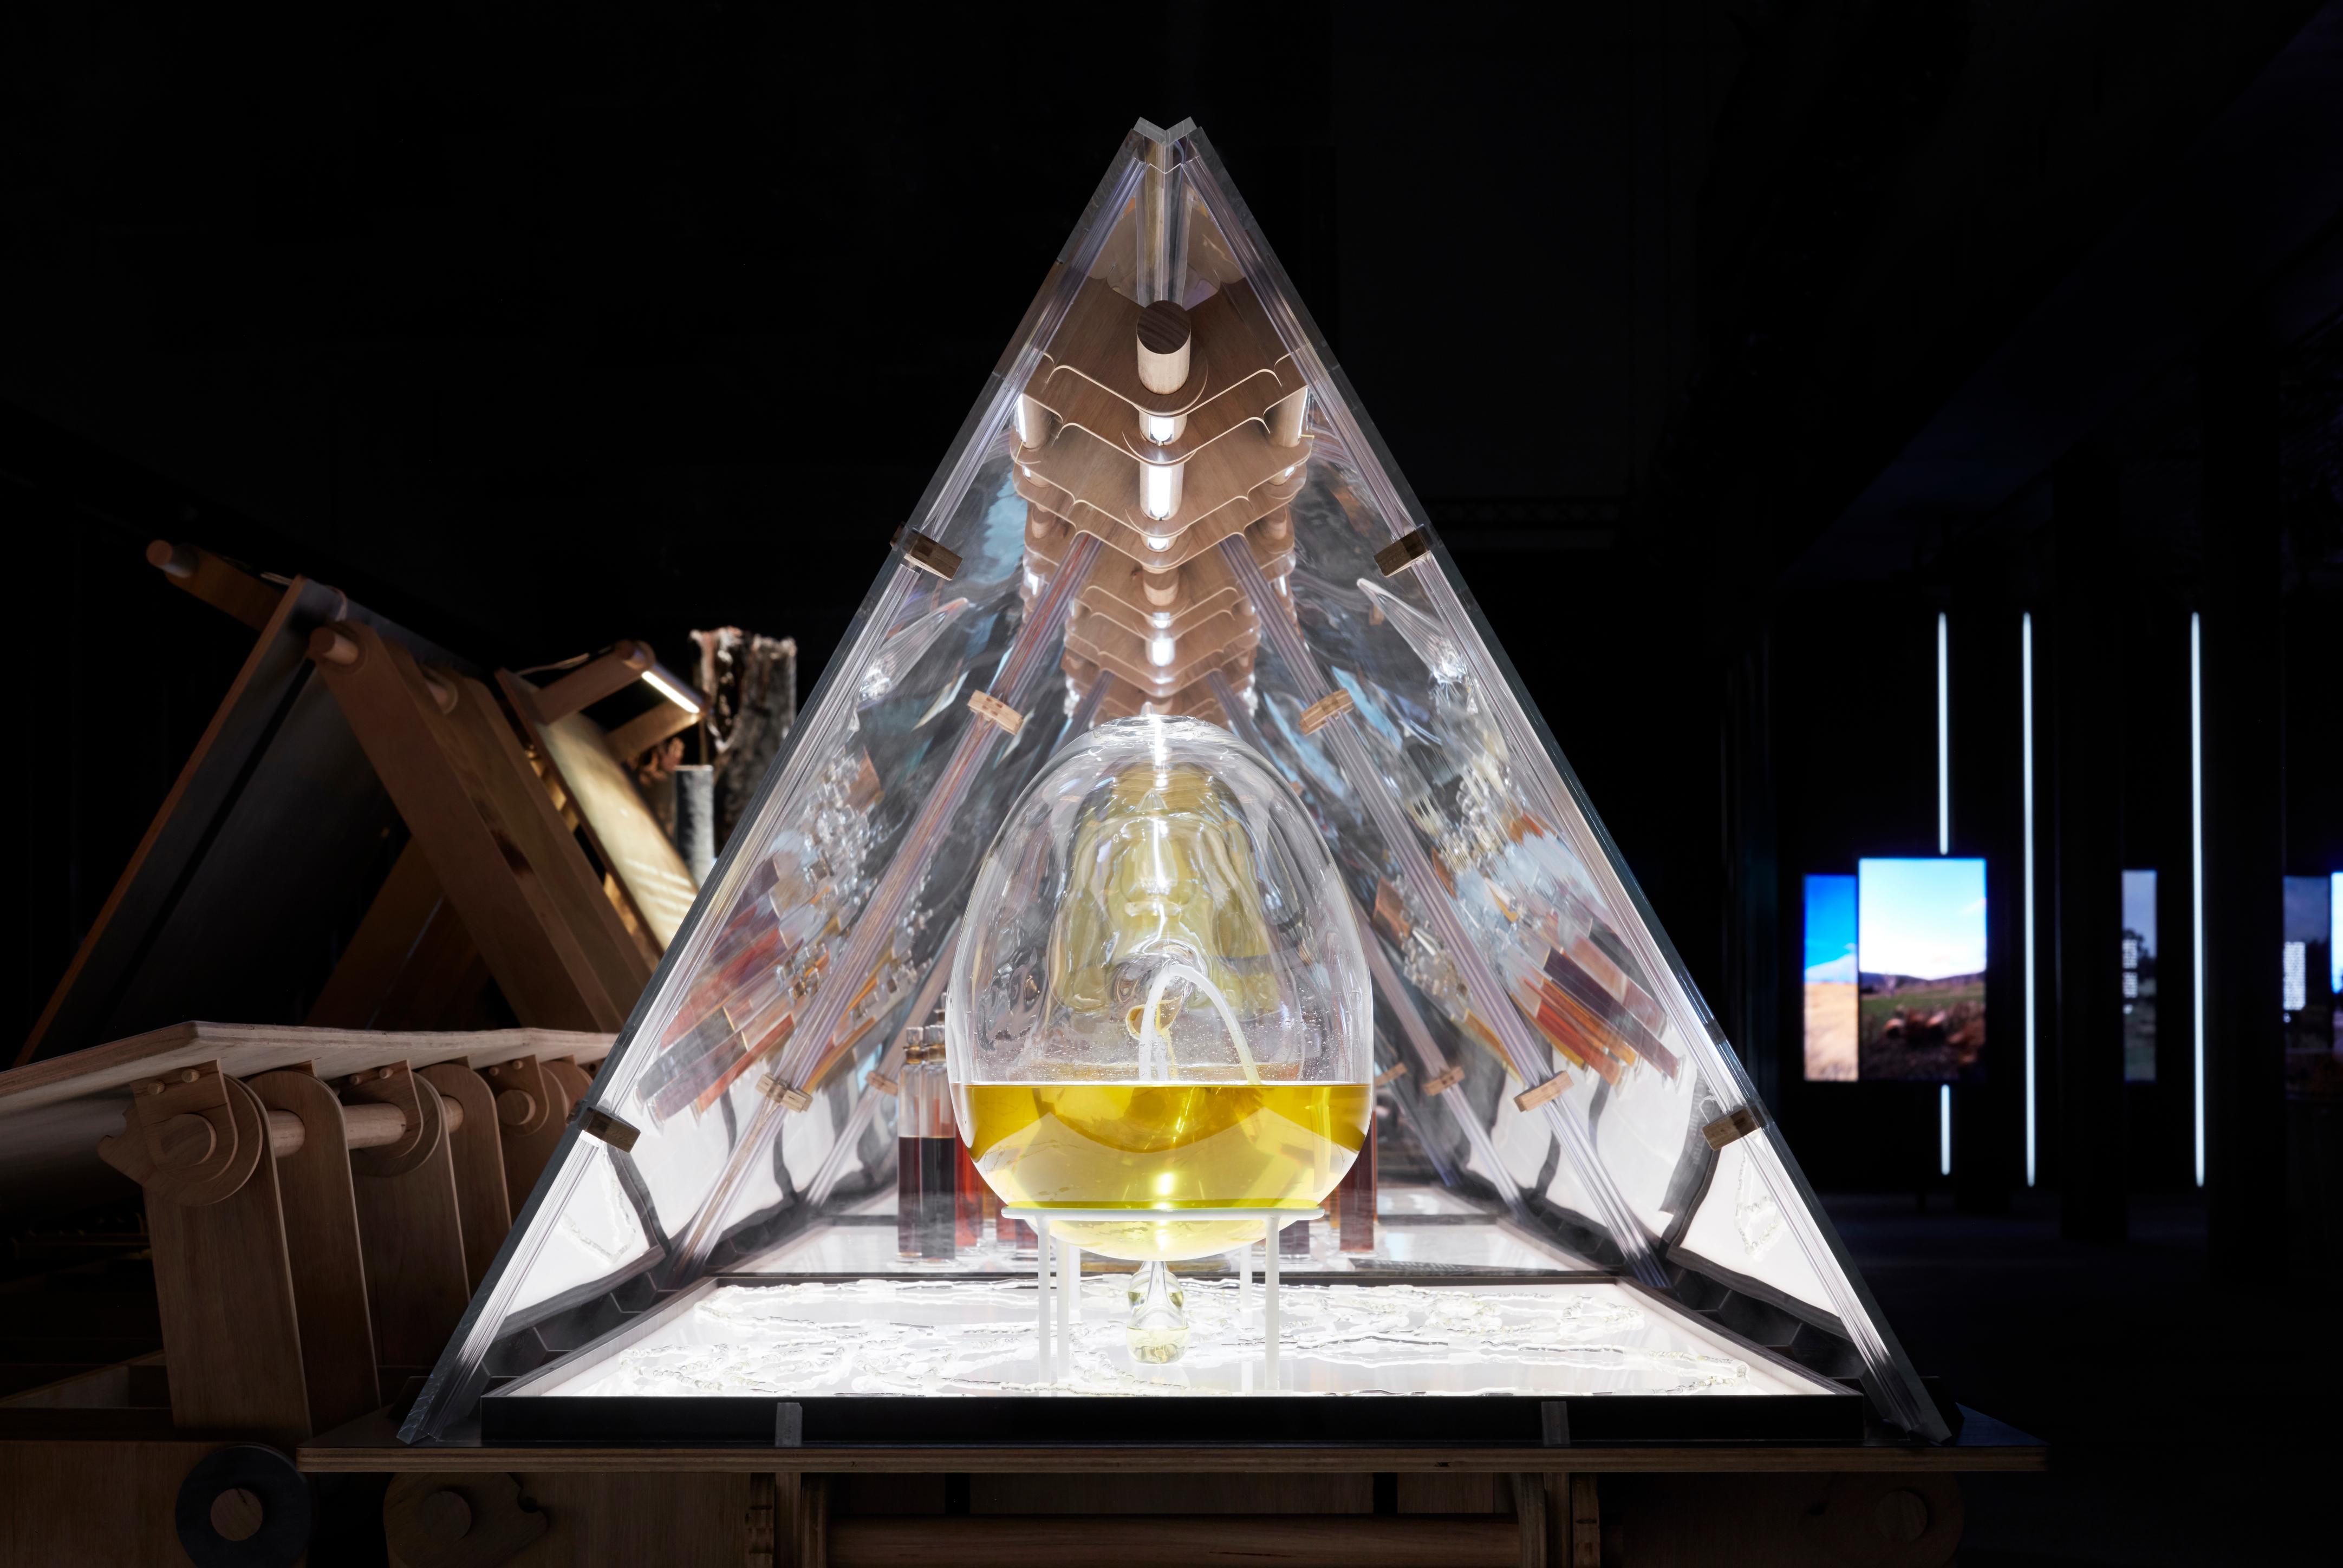 A glass pyramid seen side on with a glass globe inside filled half way with yellow oil.